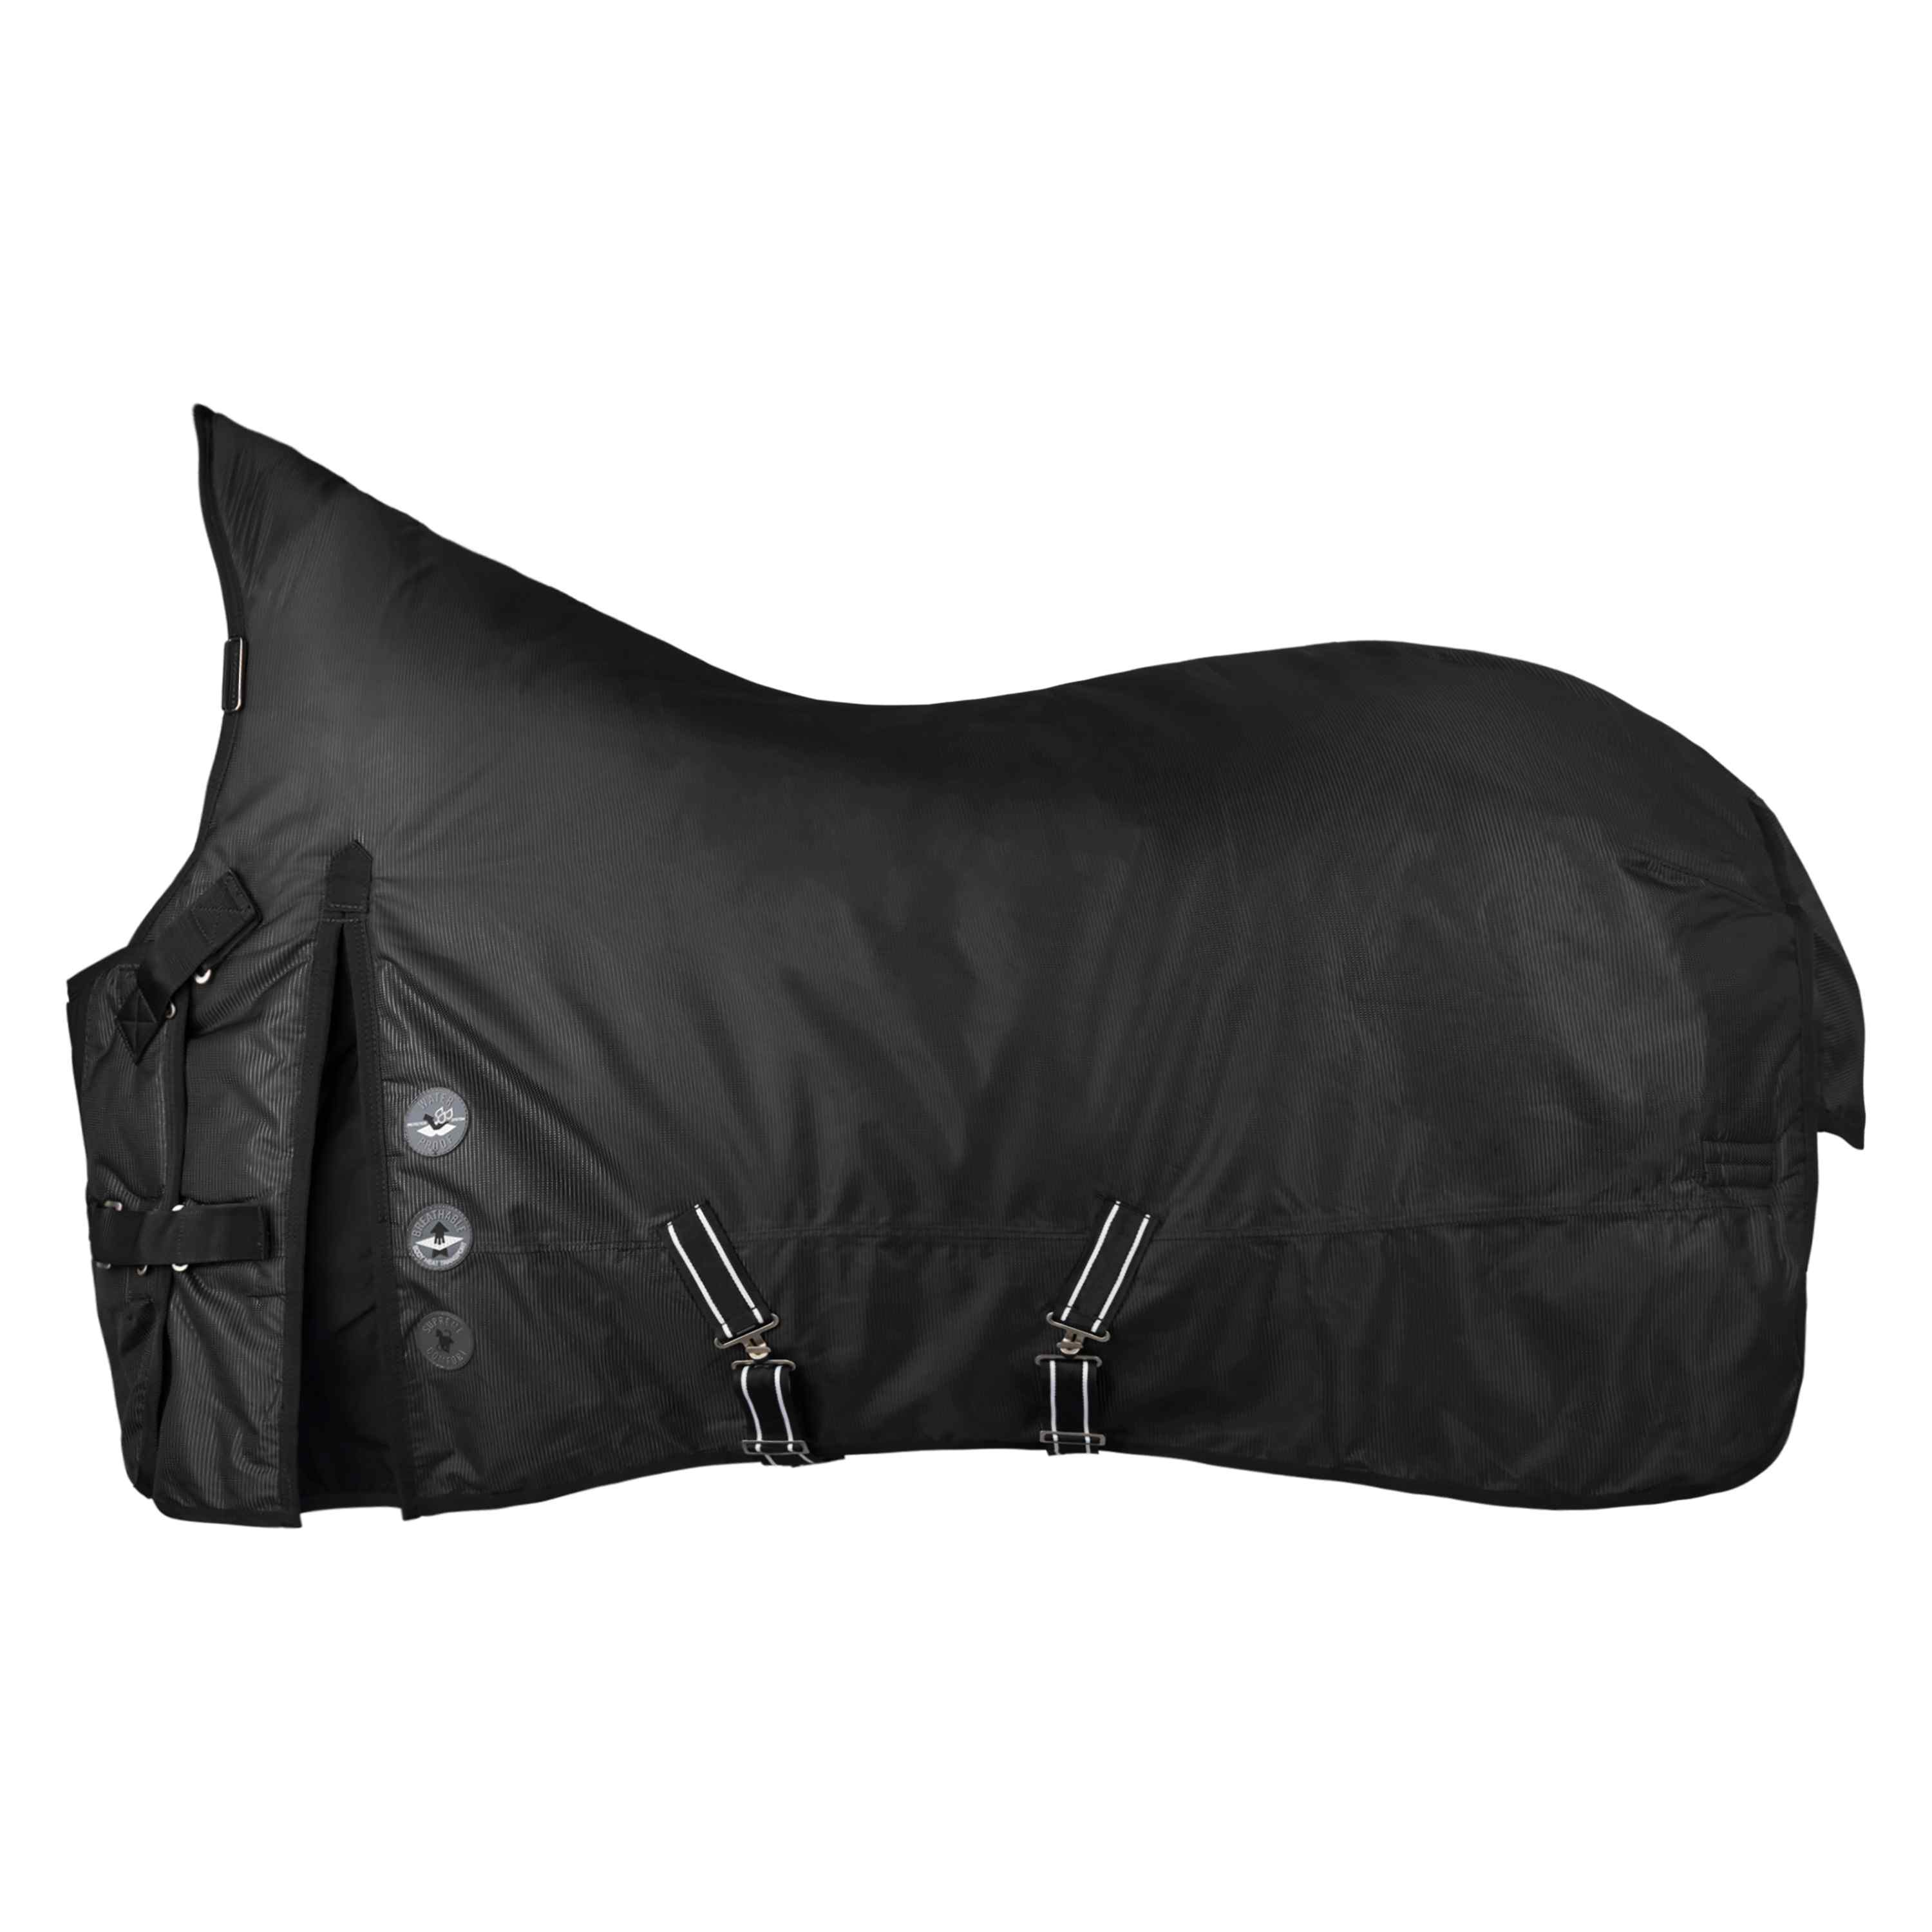 Imperial Riding | 100g Outdoordecke Move | 195 cm | Black